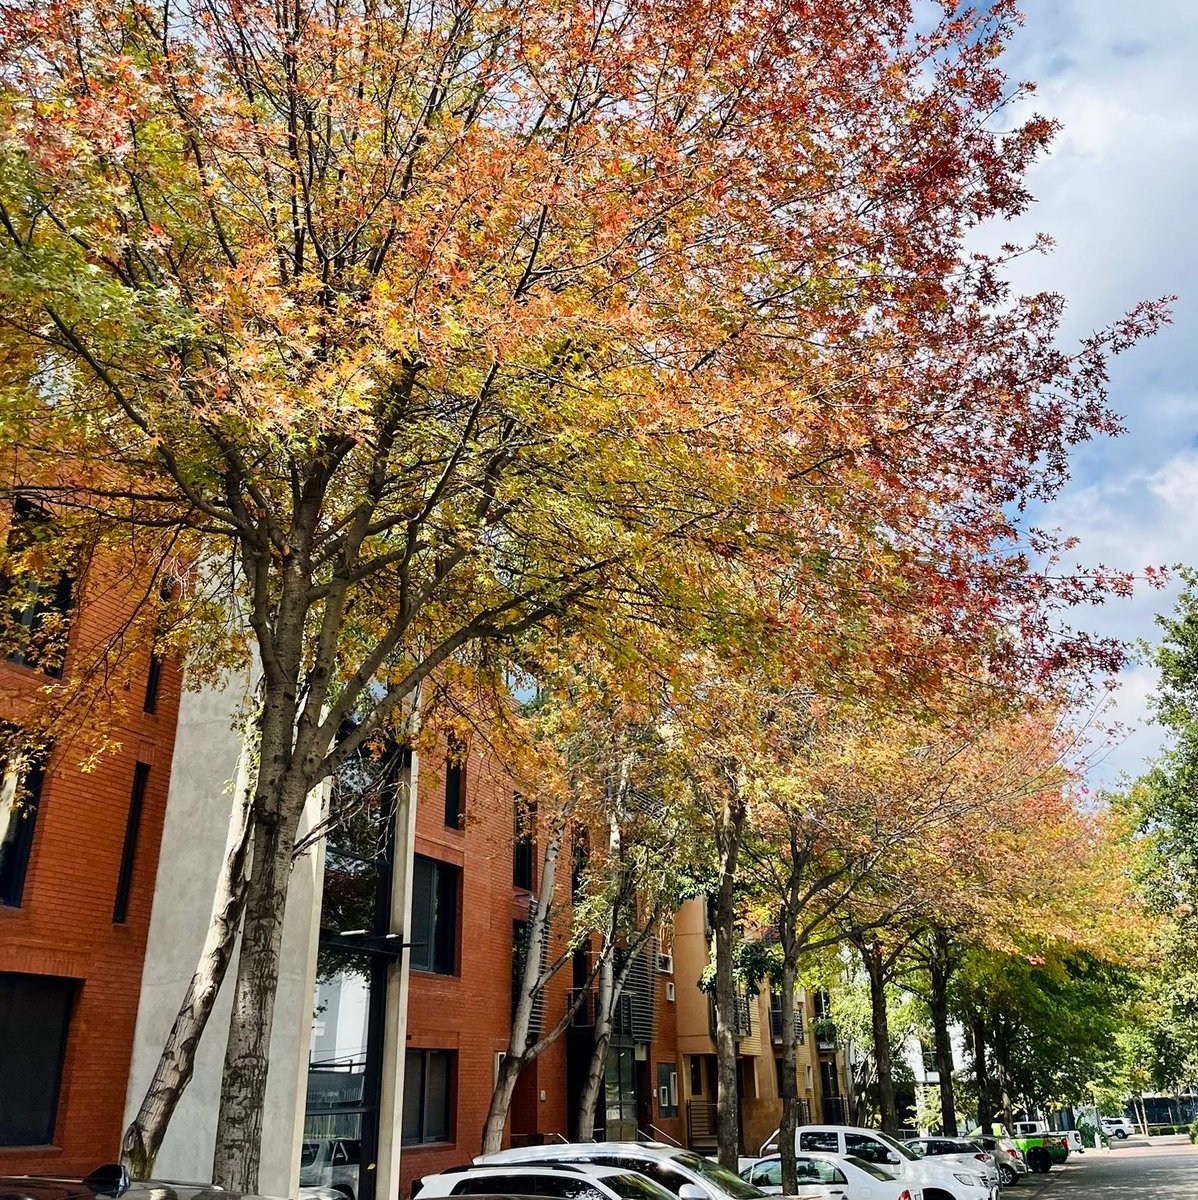 As Autumn arrives at Melrose Arch, preparations are in full swing for the seasonal transition. Enjoy the vibrant hues of changing leaves and the unmistakable chill in the air. #autumnvibes #naturelovers #fashion #MelroseArch